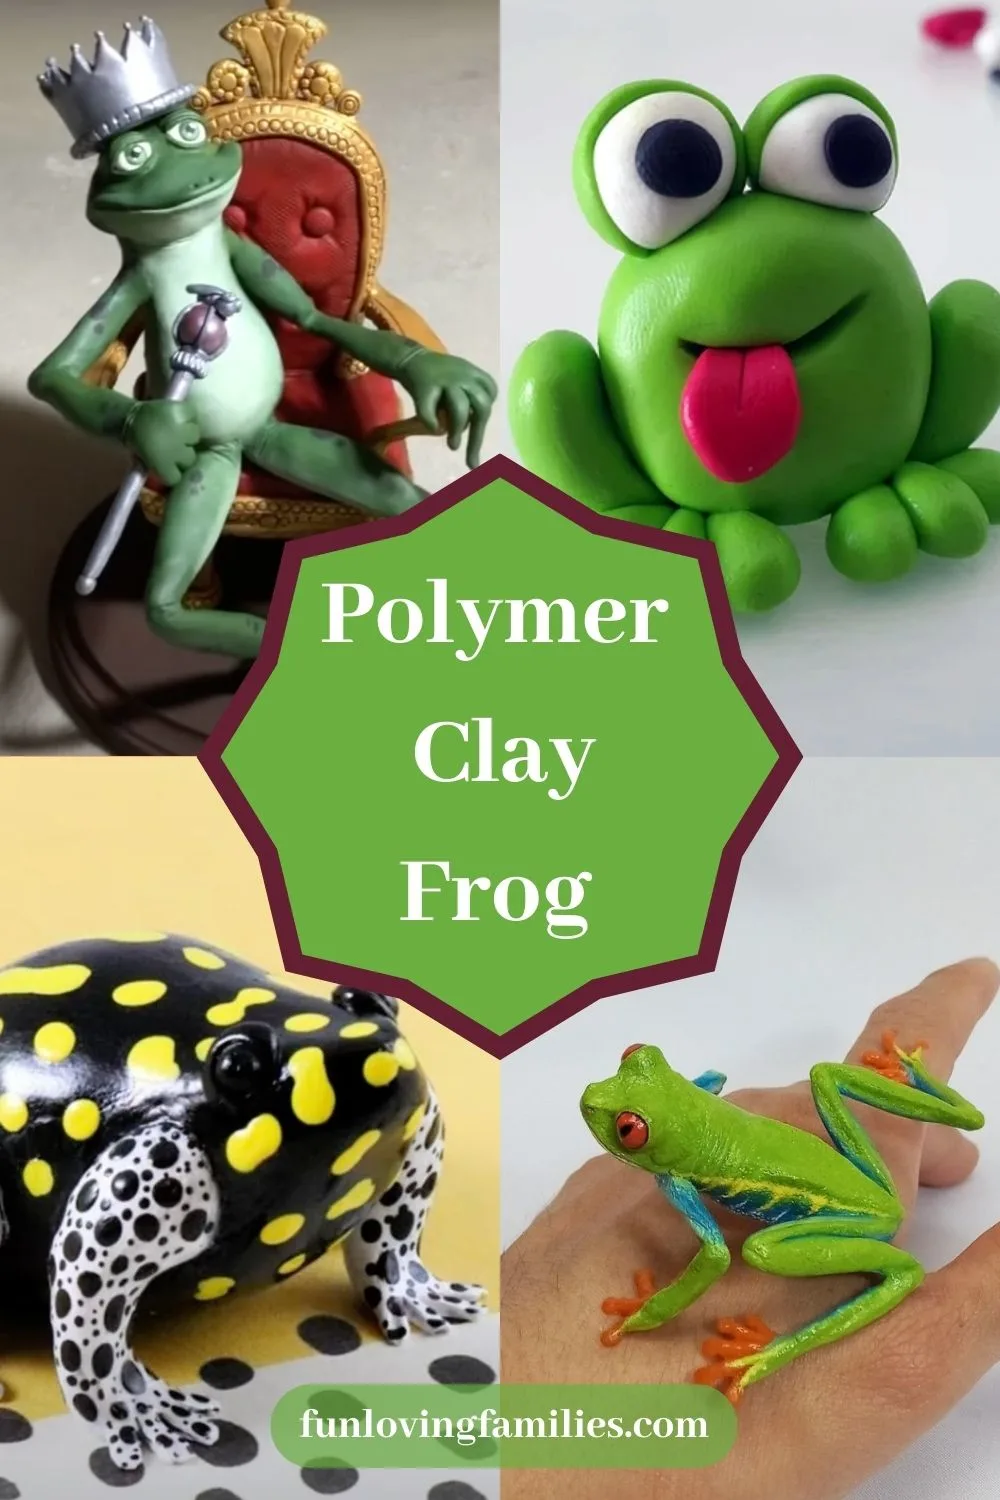 Polymer Clay Frog